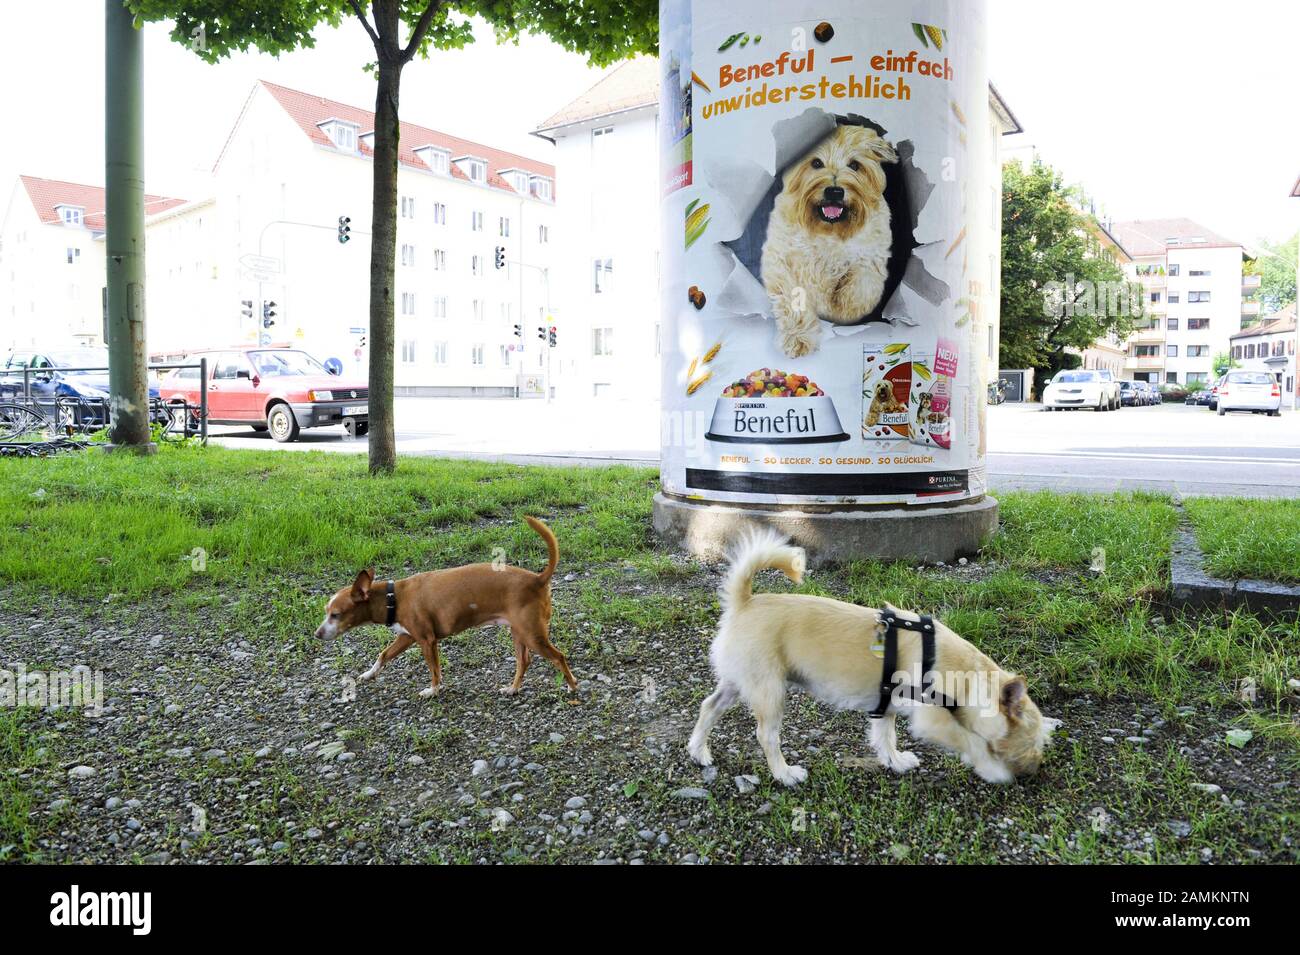 The posters of the dog food company 'Beneful' are allegedly impregnated with fragrances for dogs. However, the dogs Cinnamon and Sissi in the photos do not show any reaction to the scented posters. [automated translation] Stock Photo